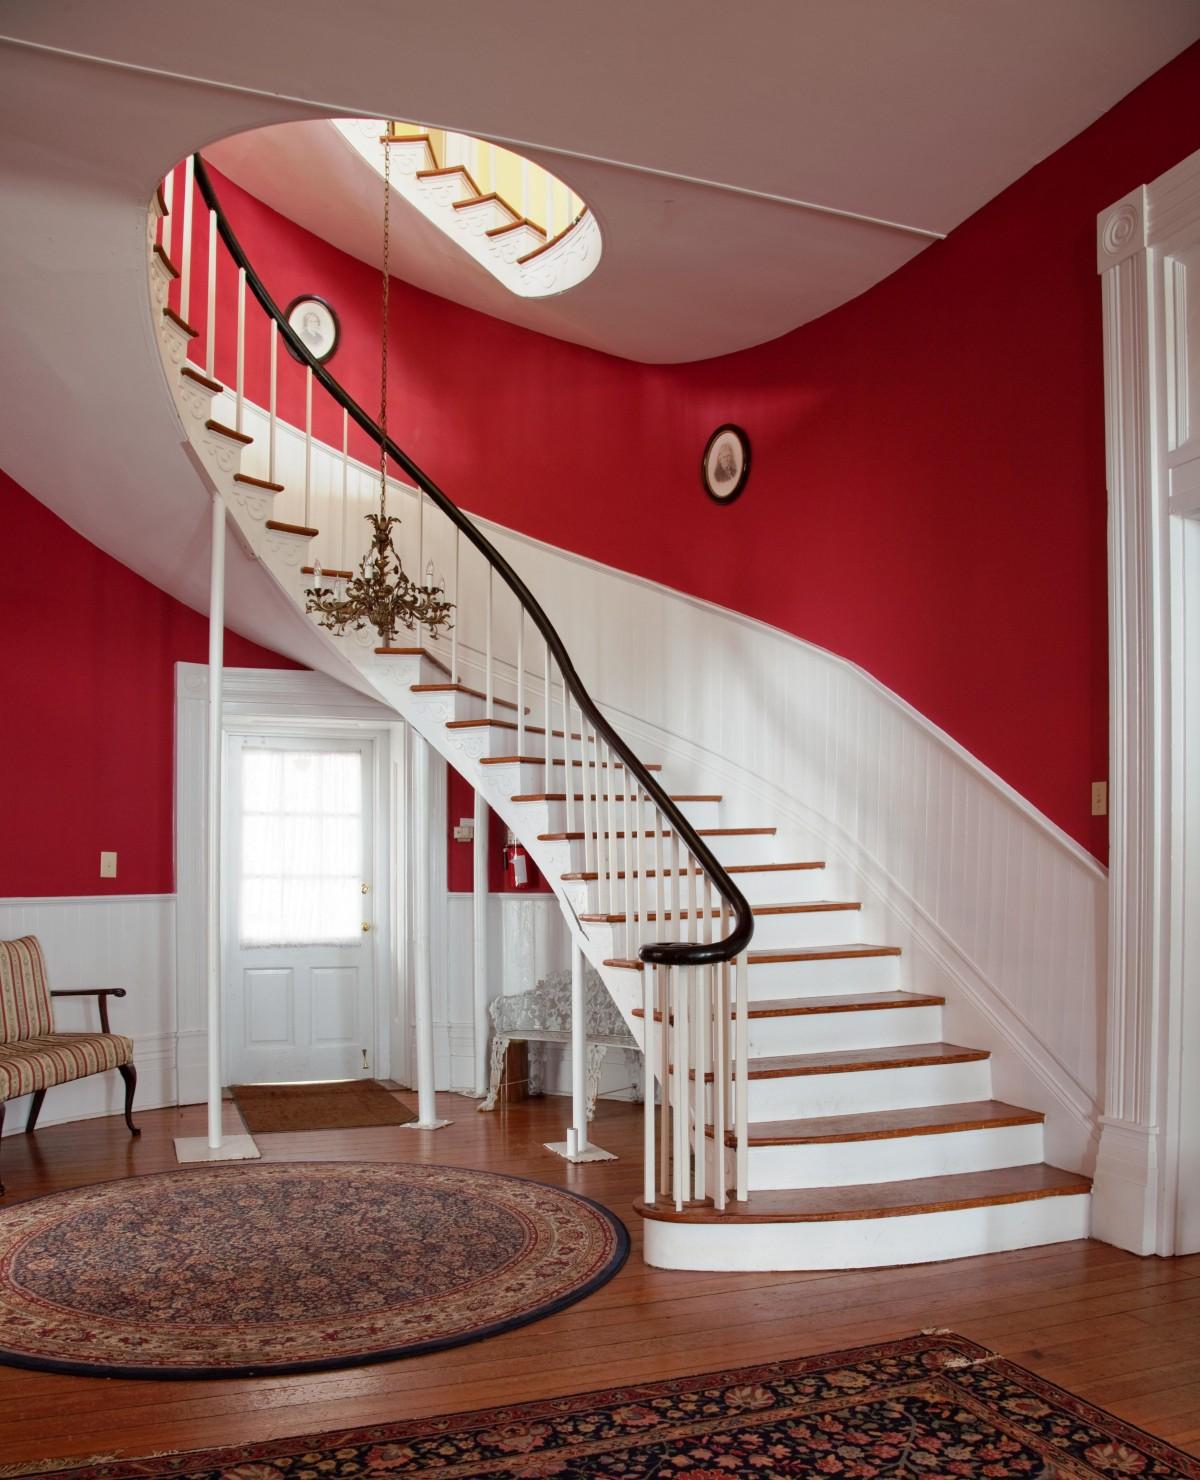 red stairway, rug in the centre, wooden flooring, metal staircase, red and white walls